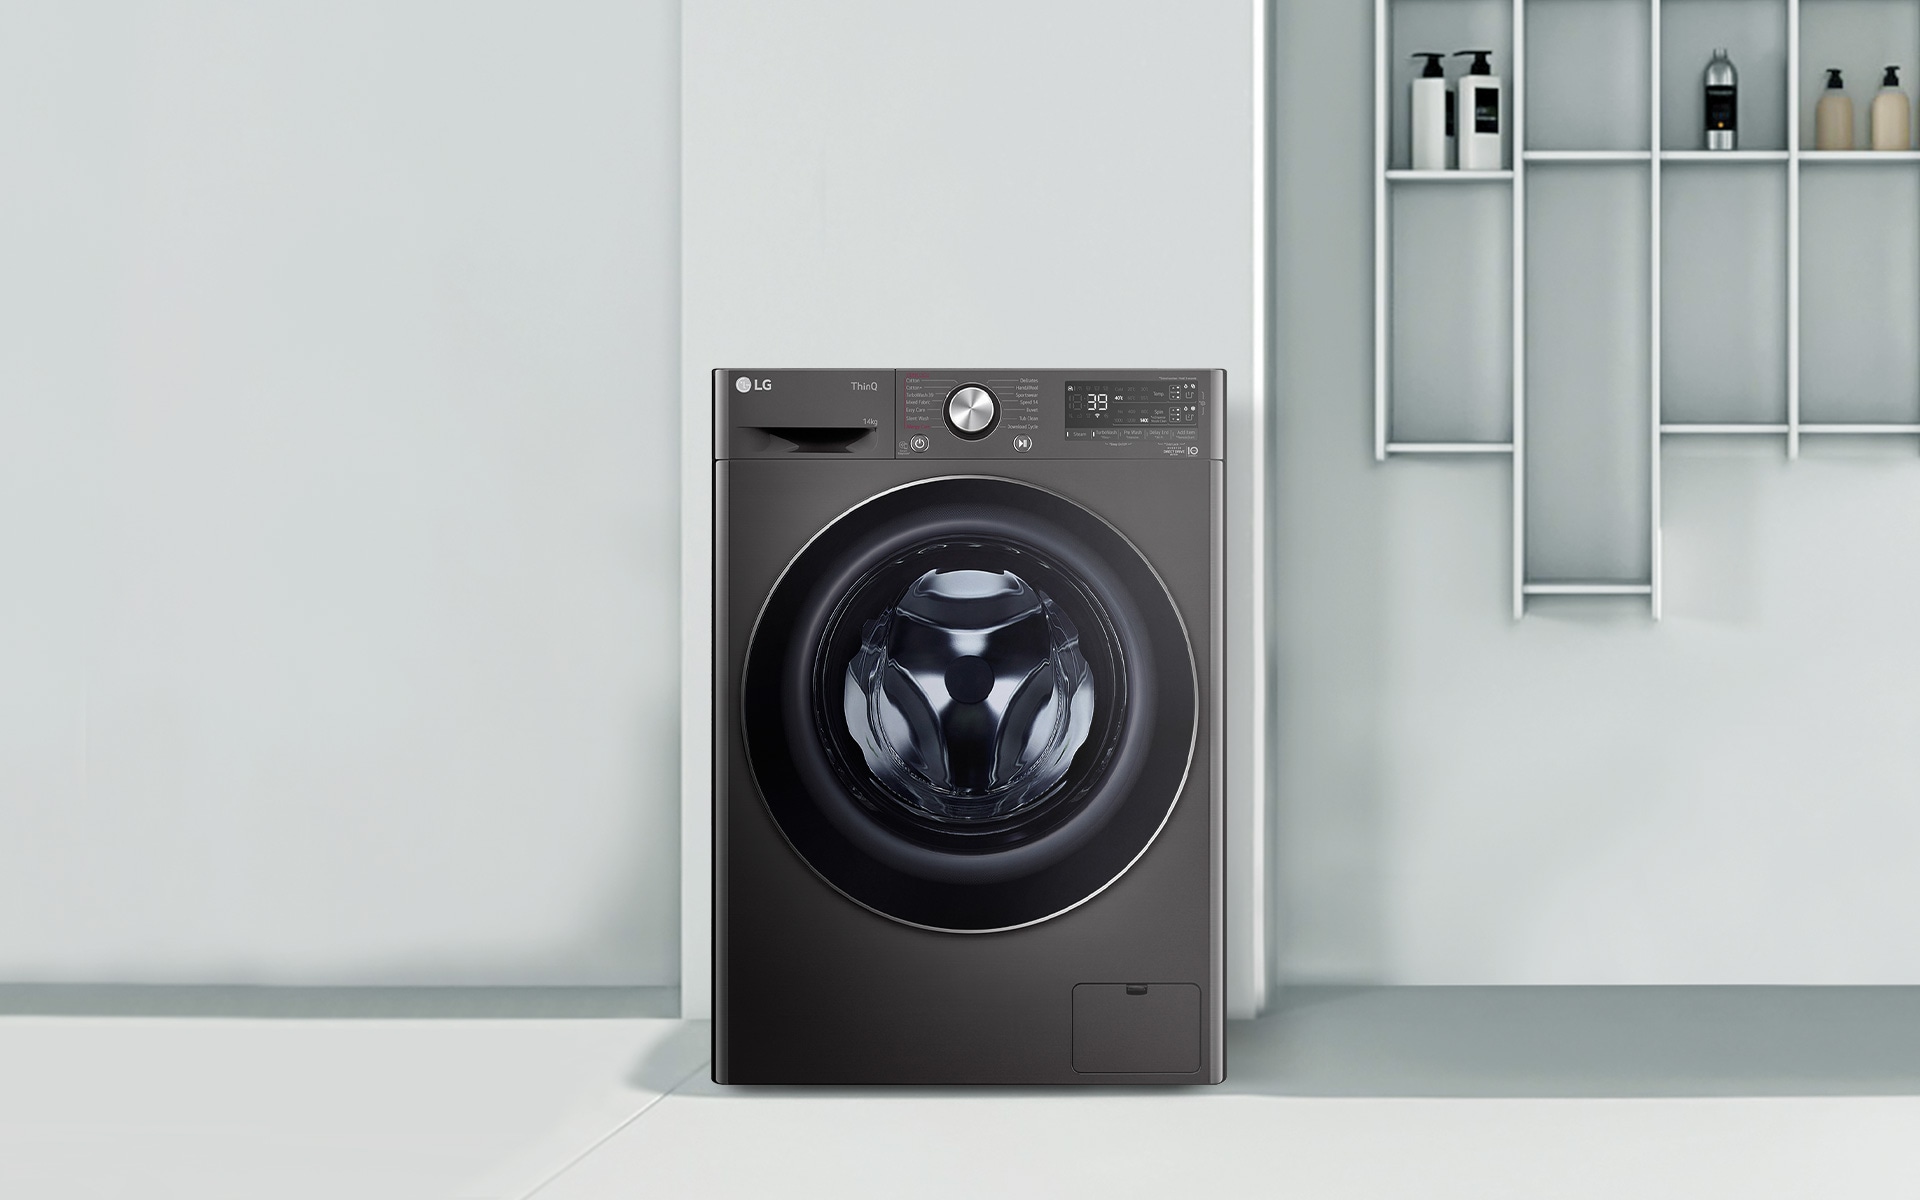 LG Washing machine] - How to clean the detergent drawer and dispenser 